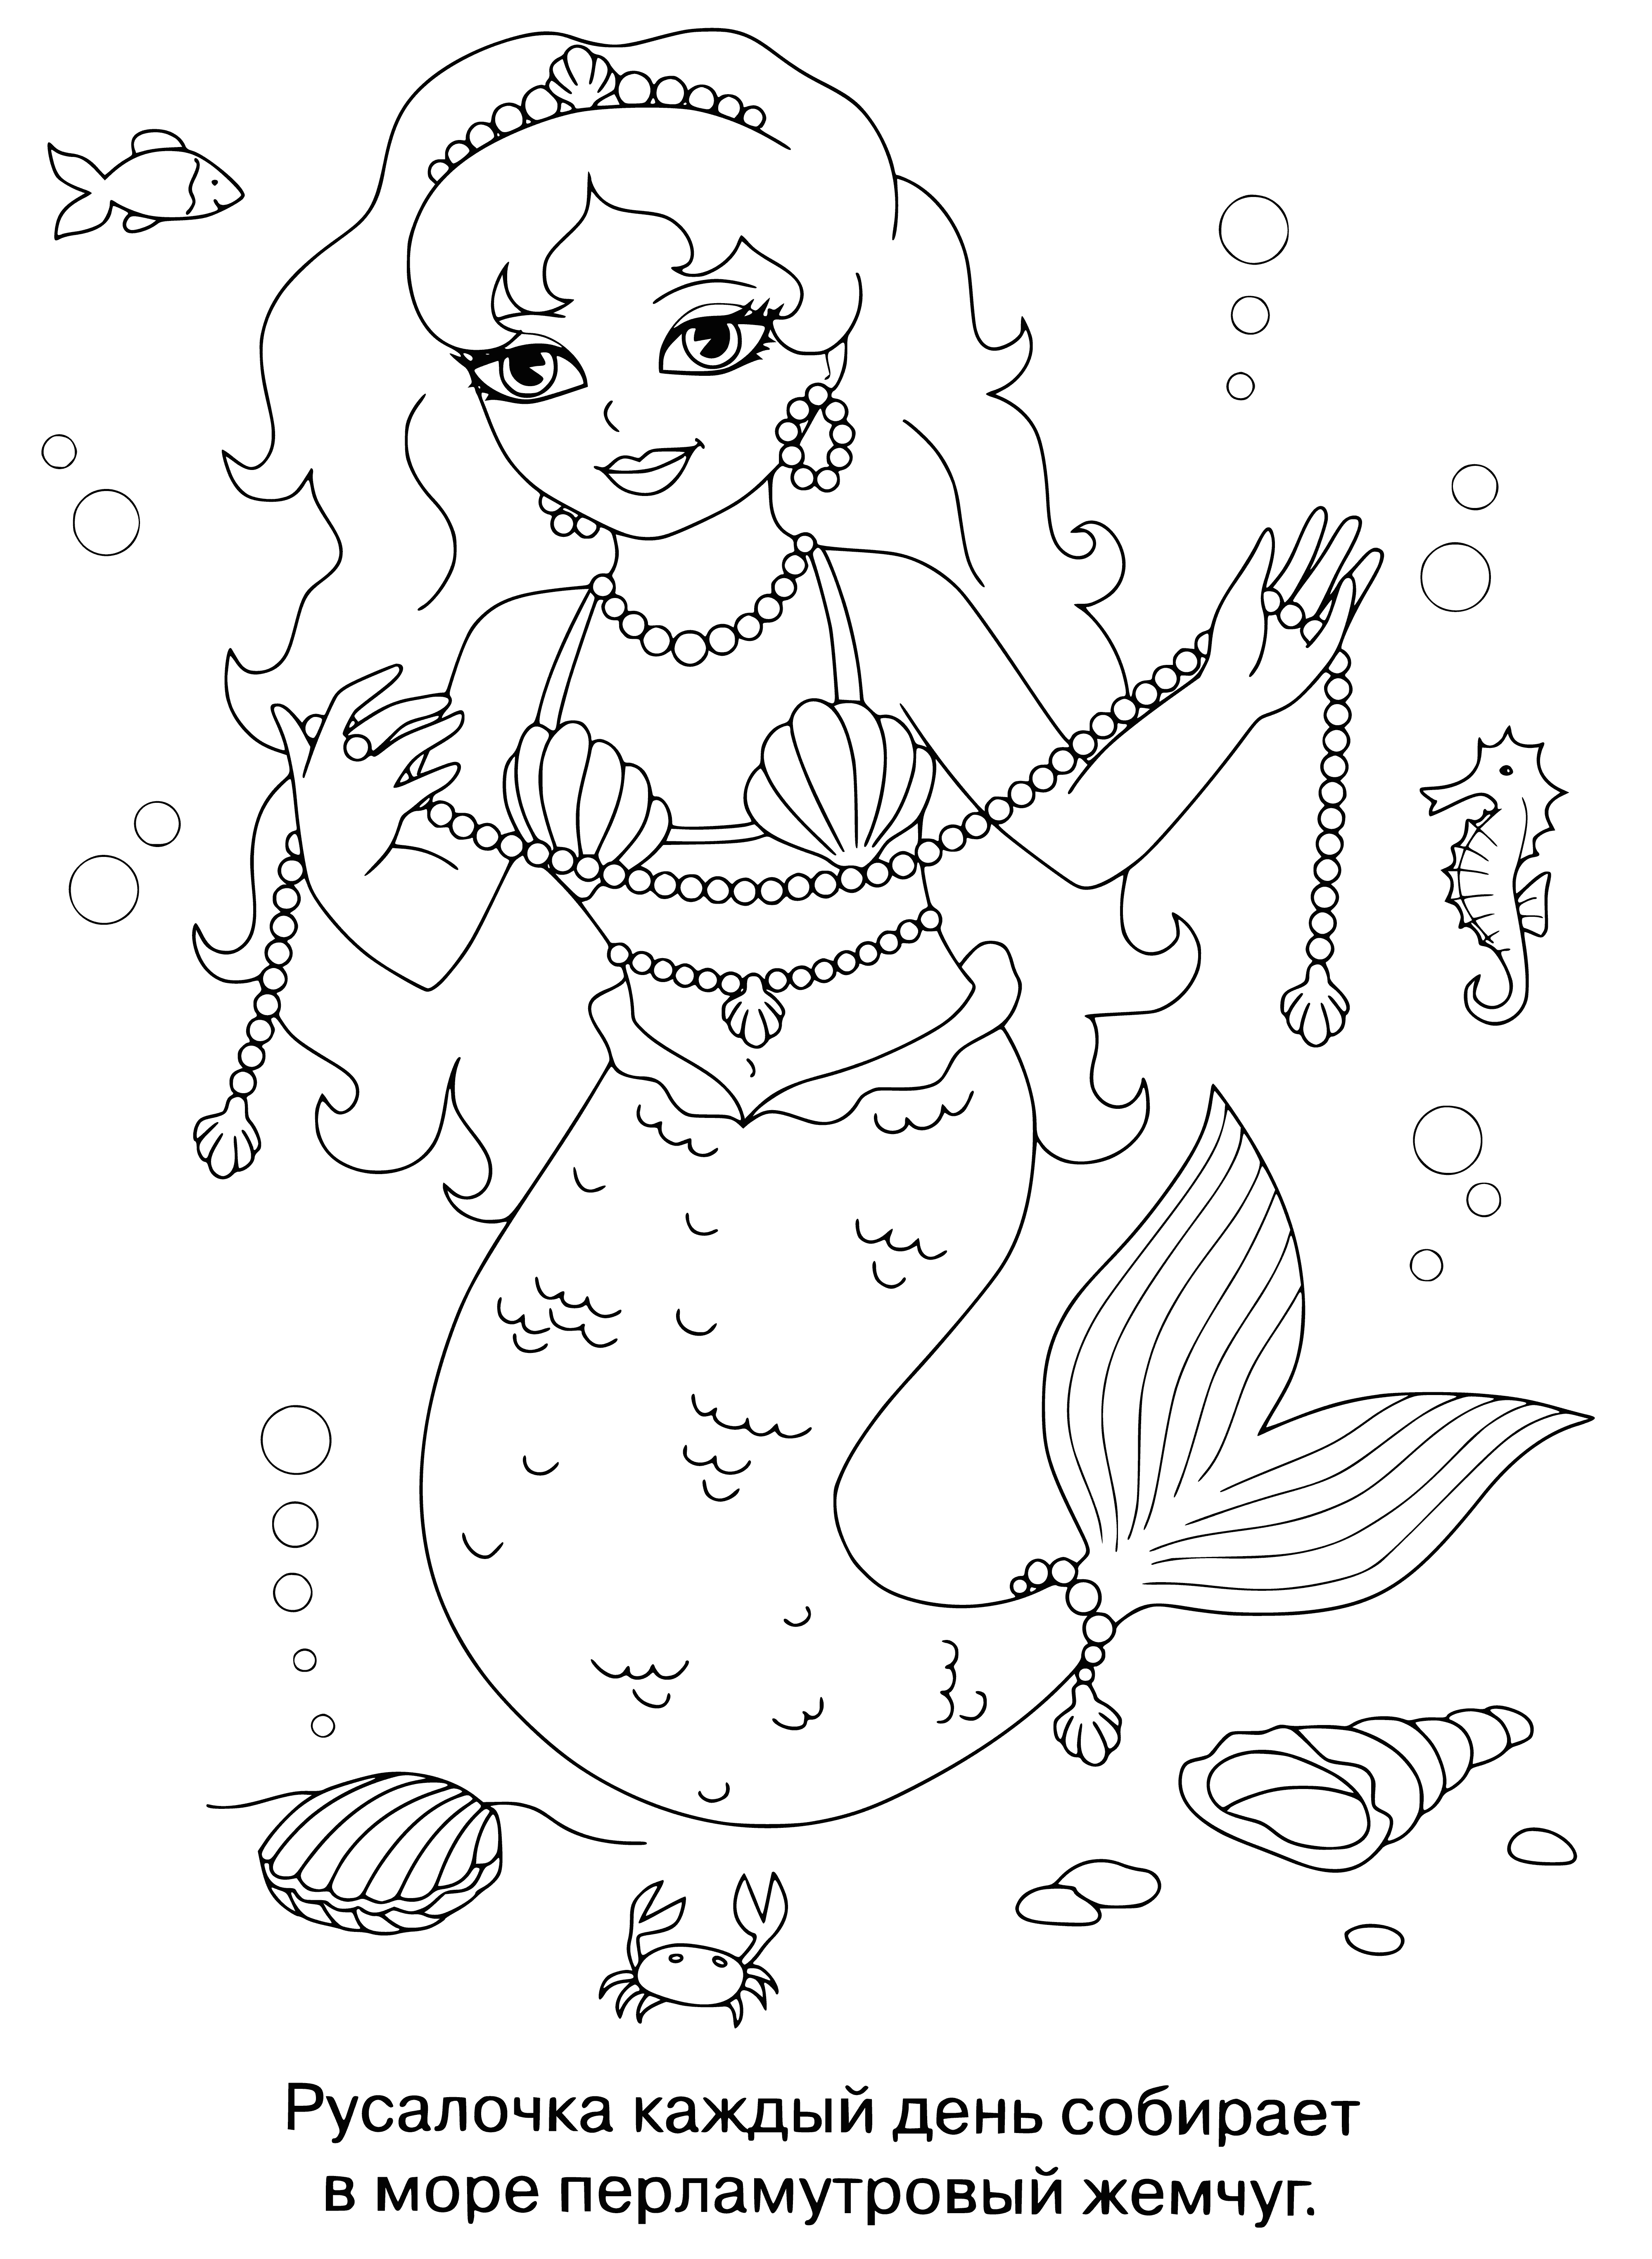 coloring page: Little girl w/ long hair stands in ocean, wearing crown & dress w/ fins turned up and tail. Surrounded by fish and creatures of the sea.